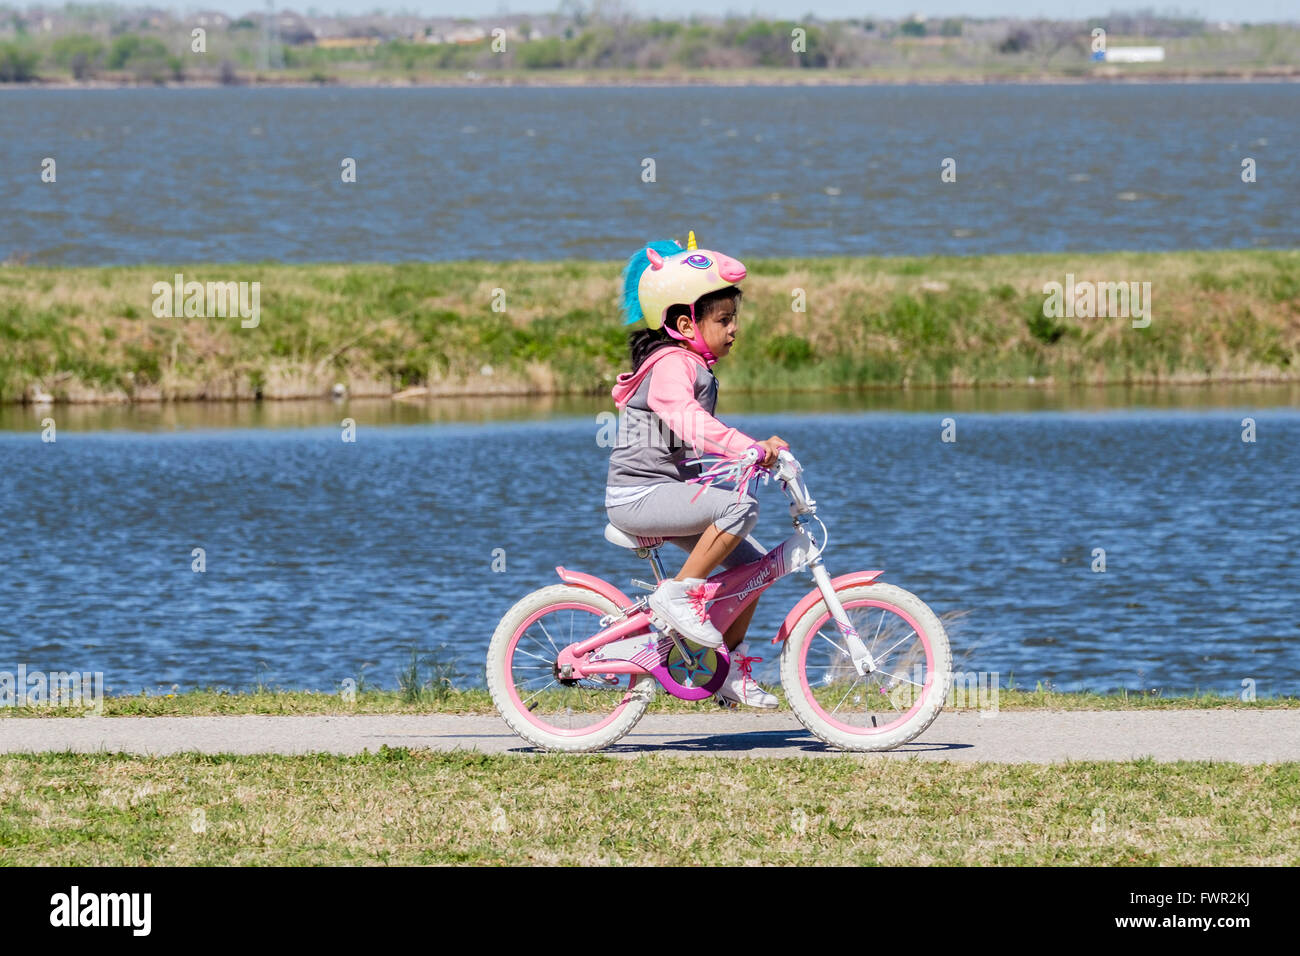 A young Hispanic girl with a unicorn helmit rides her bicycle on the trails at Overholser lake, Oklahoma City, Oklahoma, USA. Stock Photo